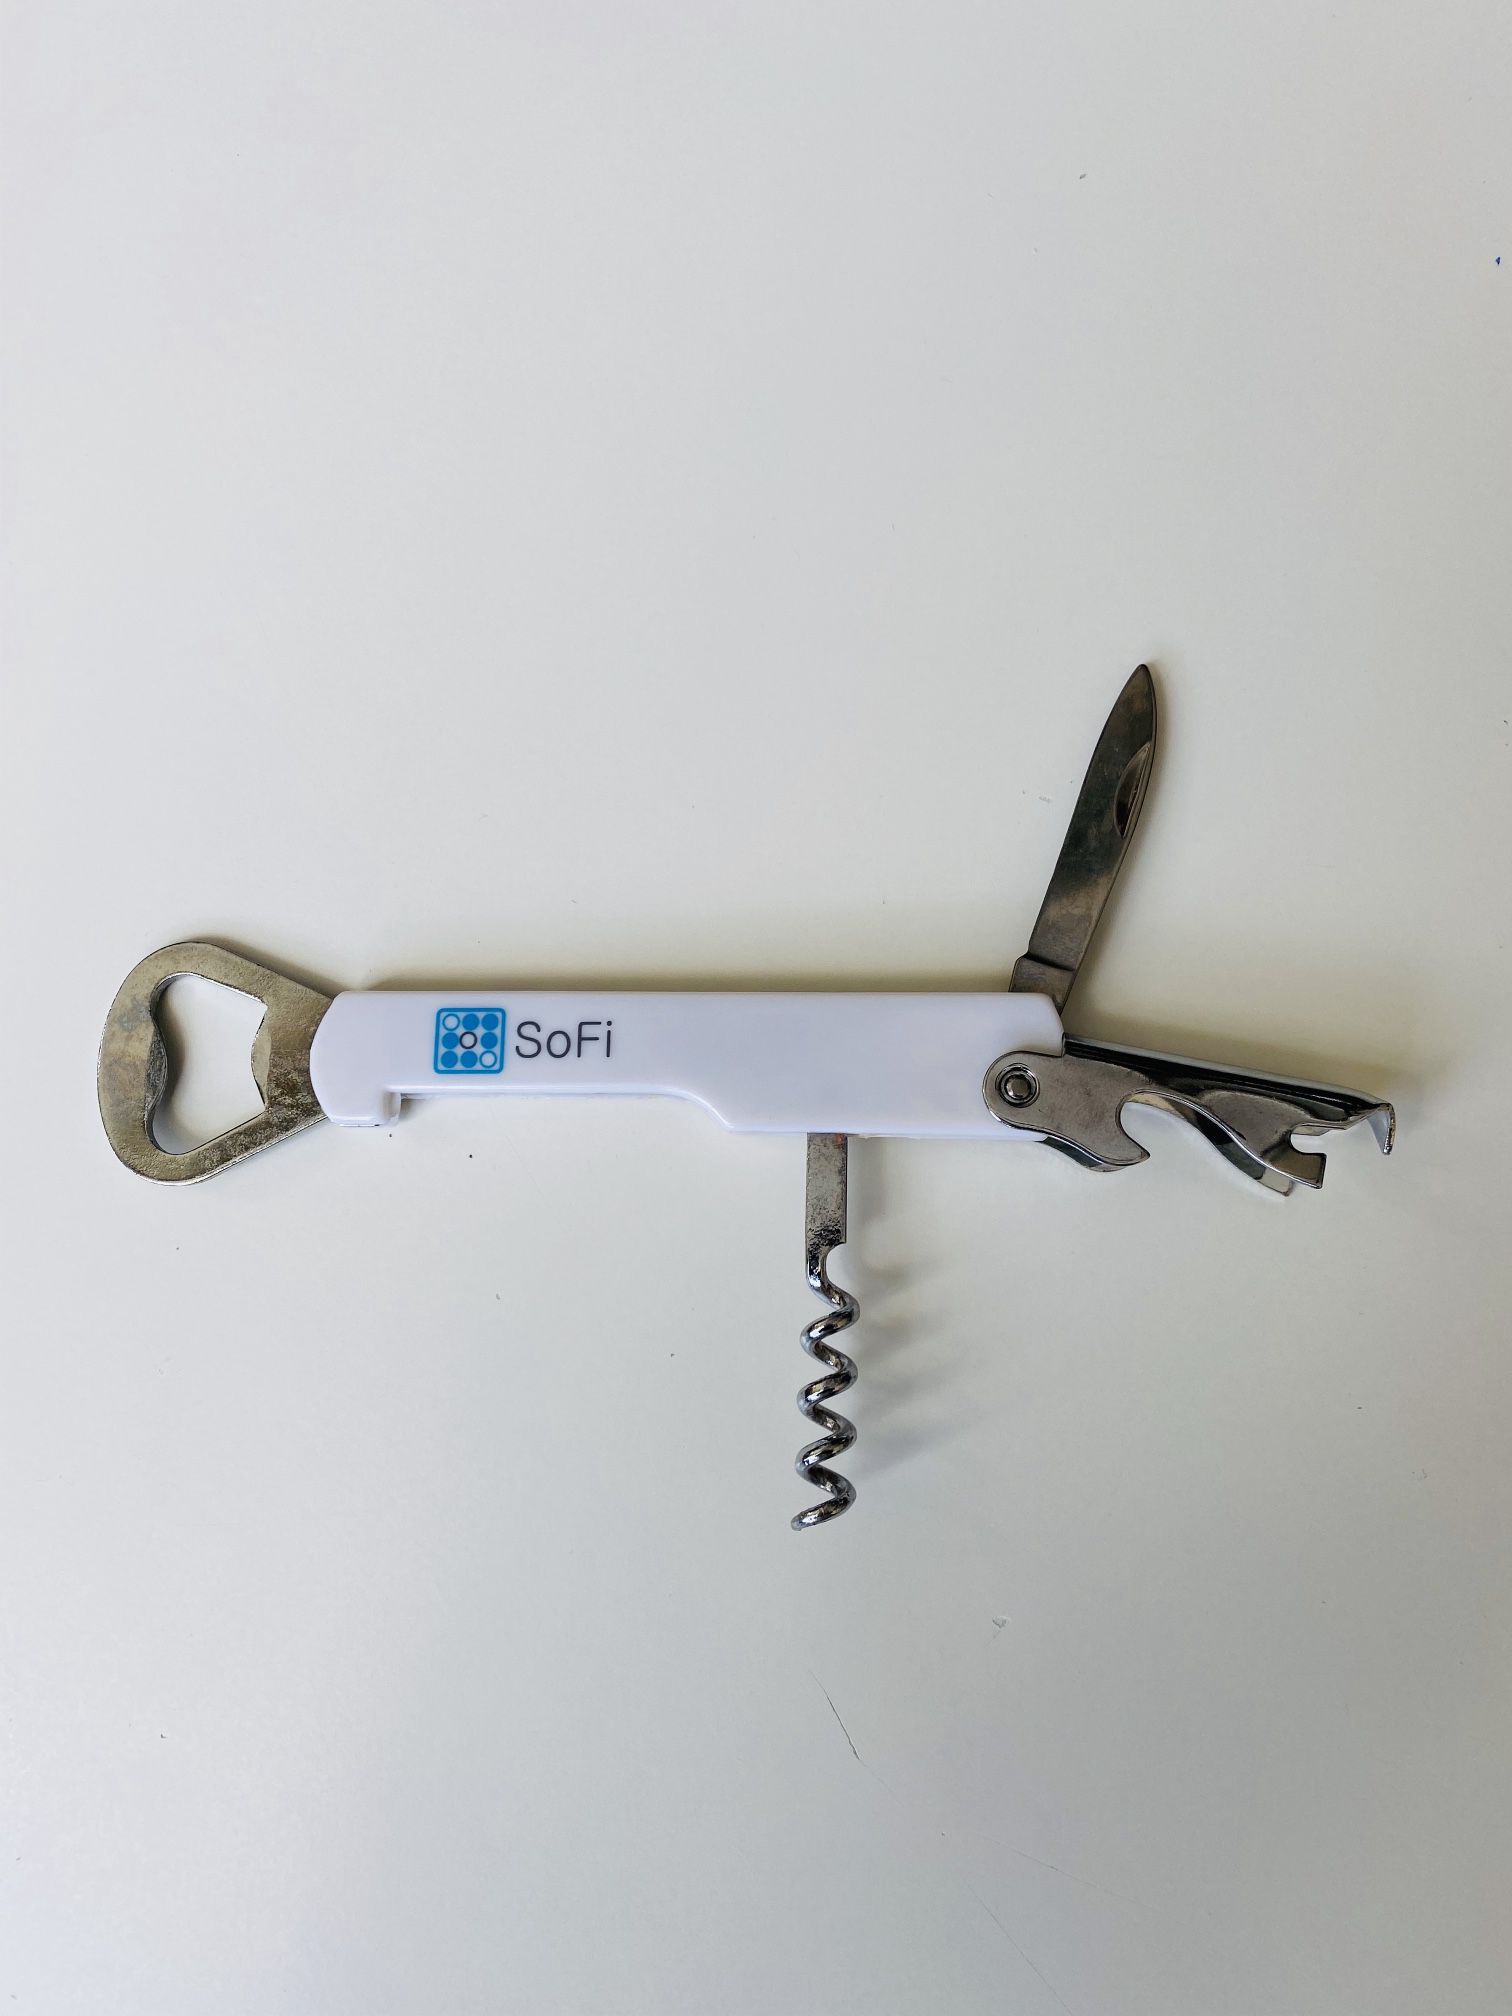 Stainless Corkscrew-Bottle Opener. New. Never used. Very efficient do-it-all 4-tool instrument. Ergonomic handle. 4-turn worm. Integrated foil cutter.